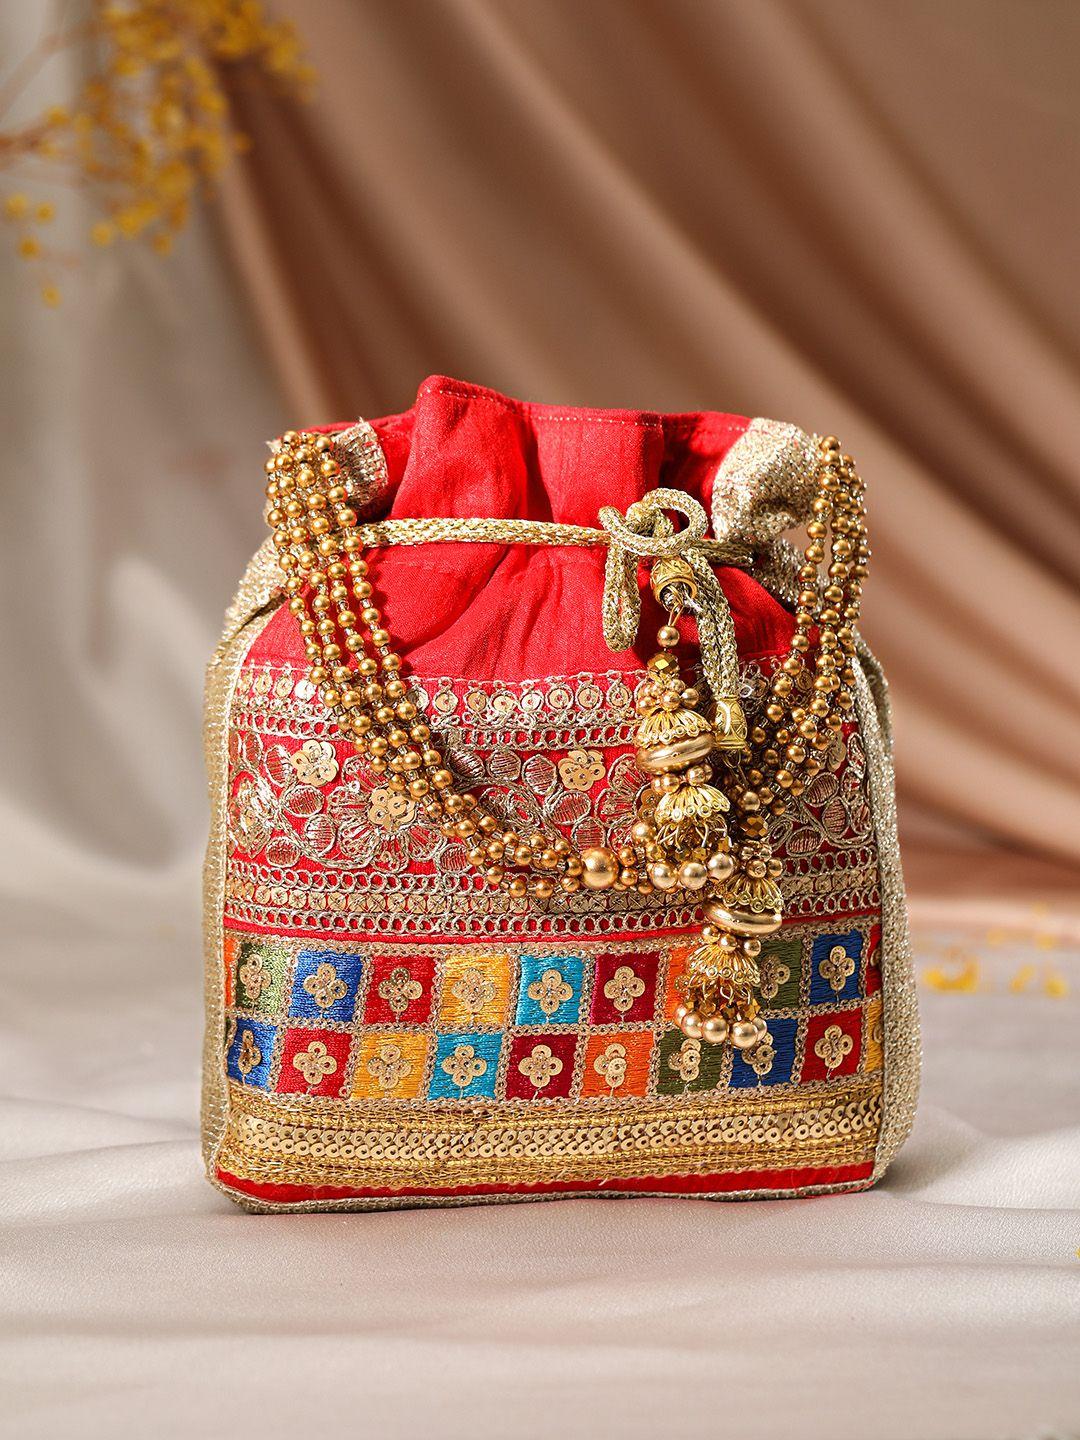 rubans red & gold-toned embroidered potli clutch